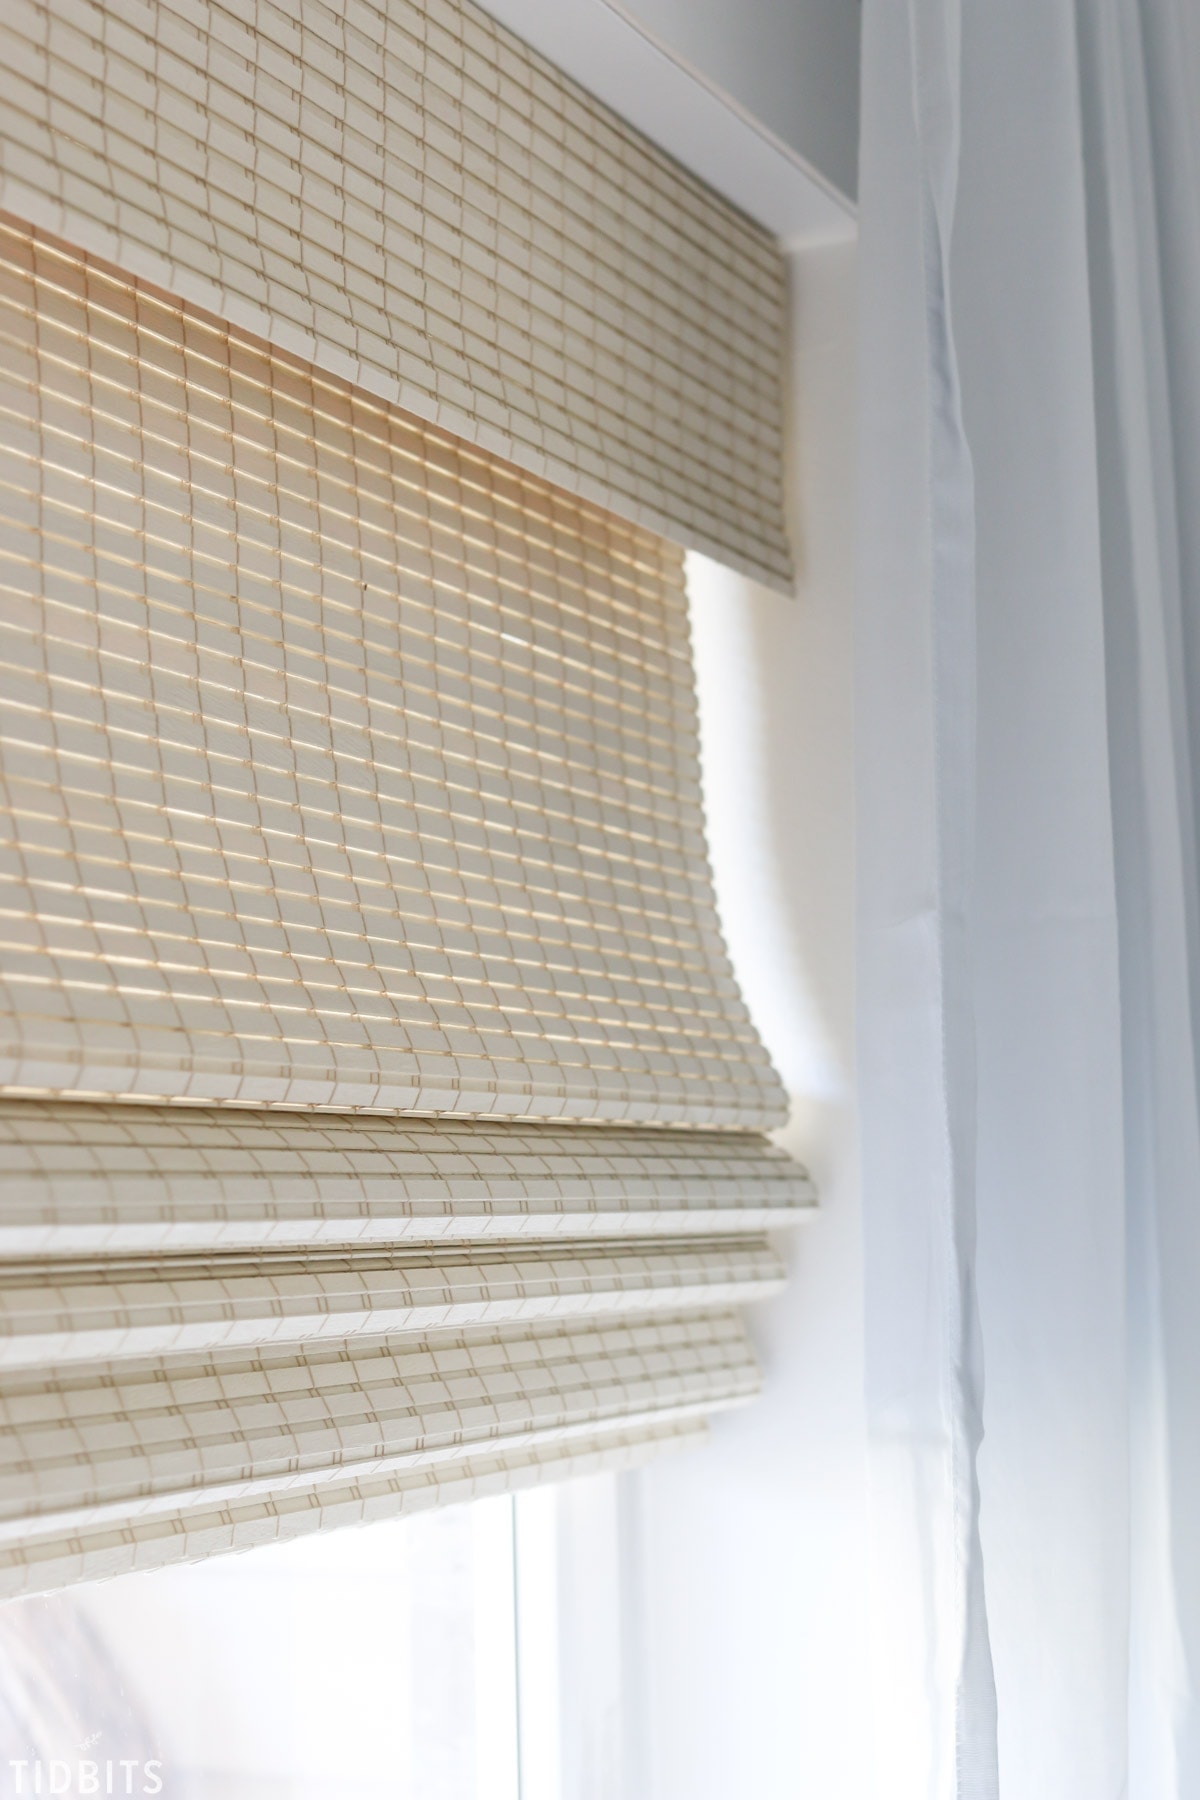 Our beautiful natural woven shades for our home office.